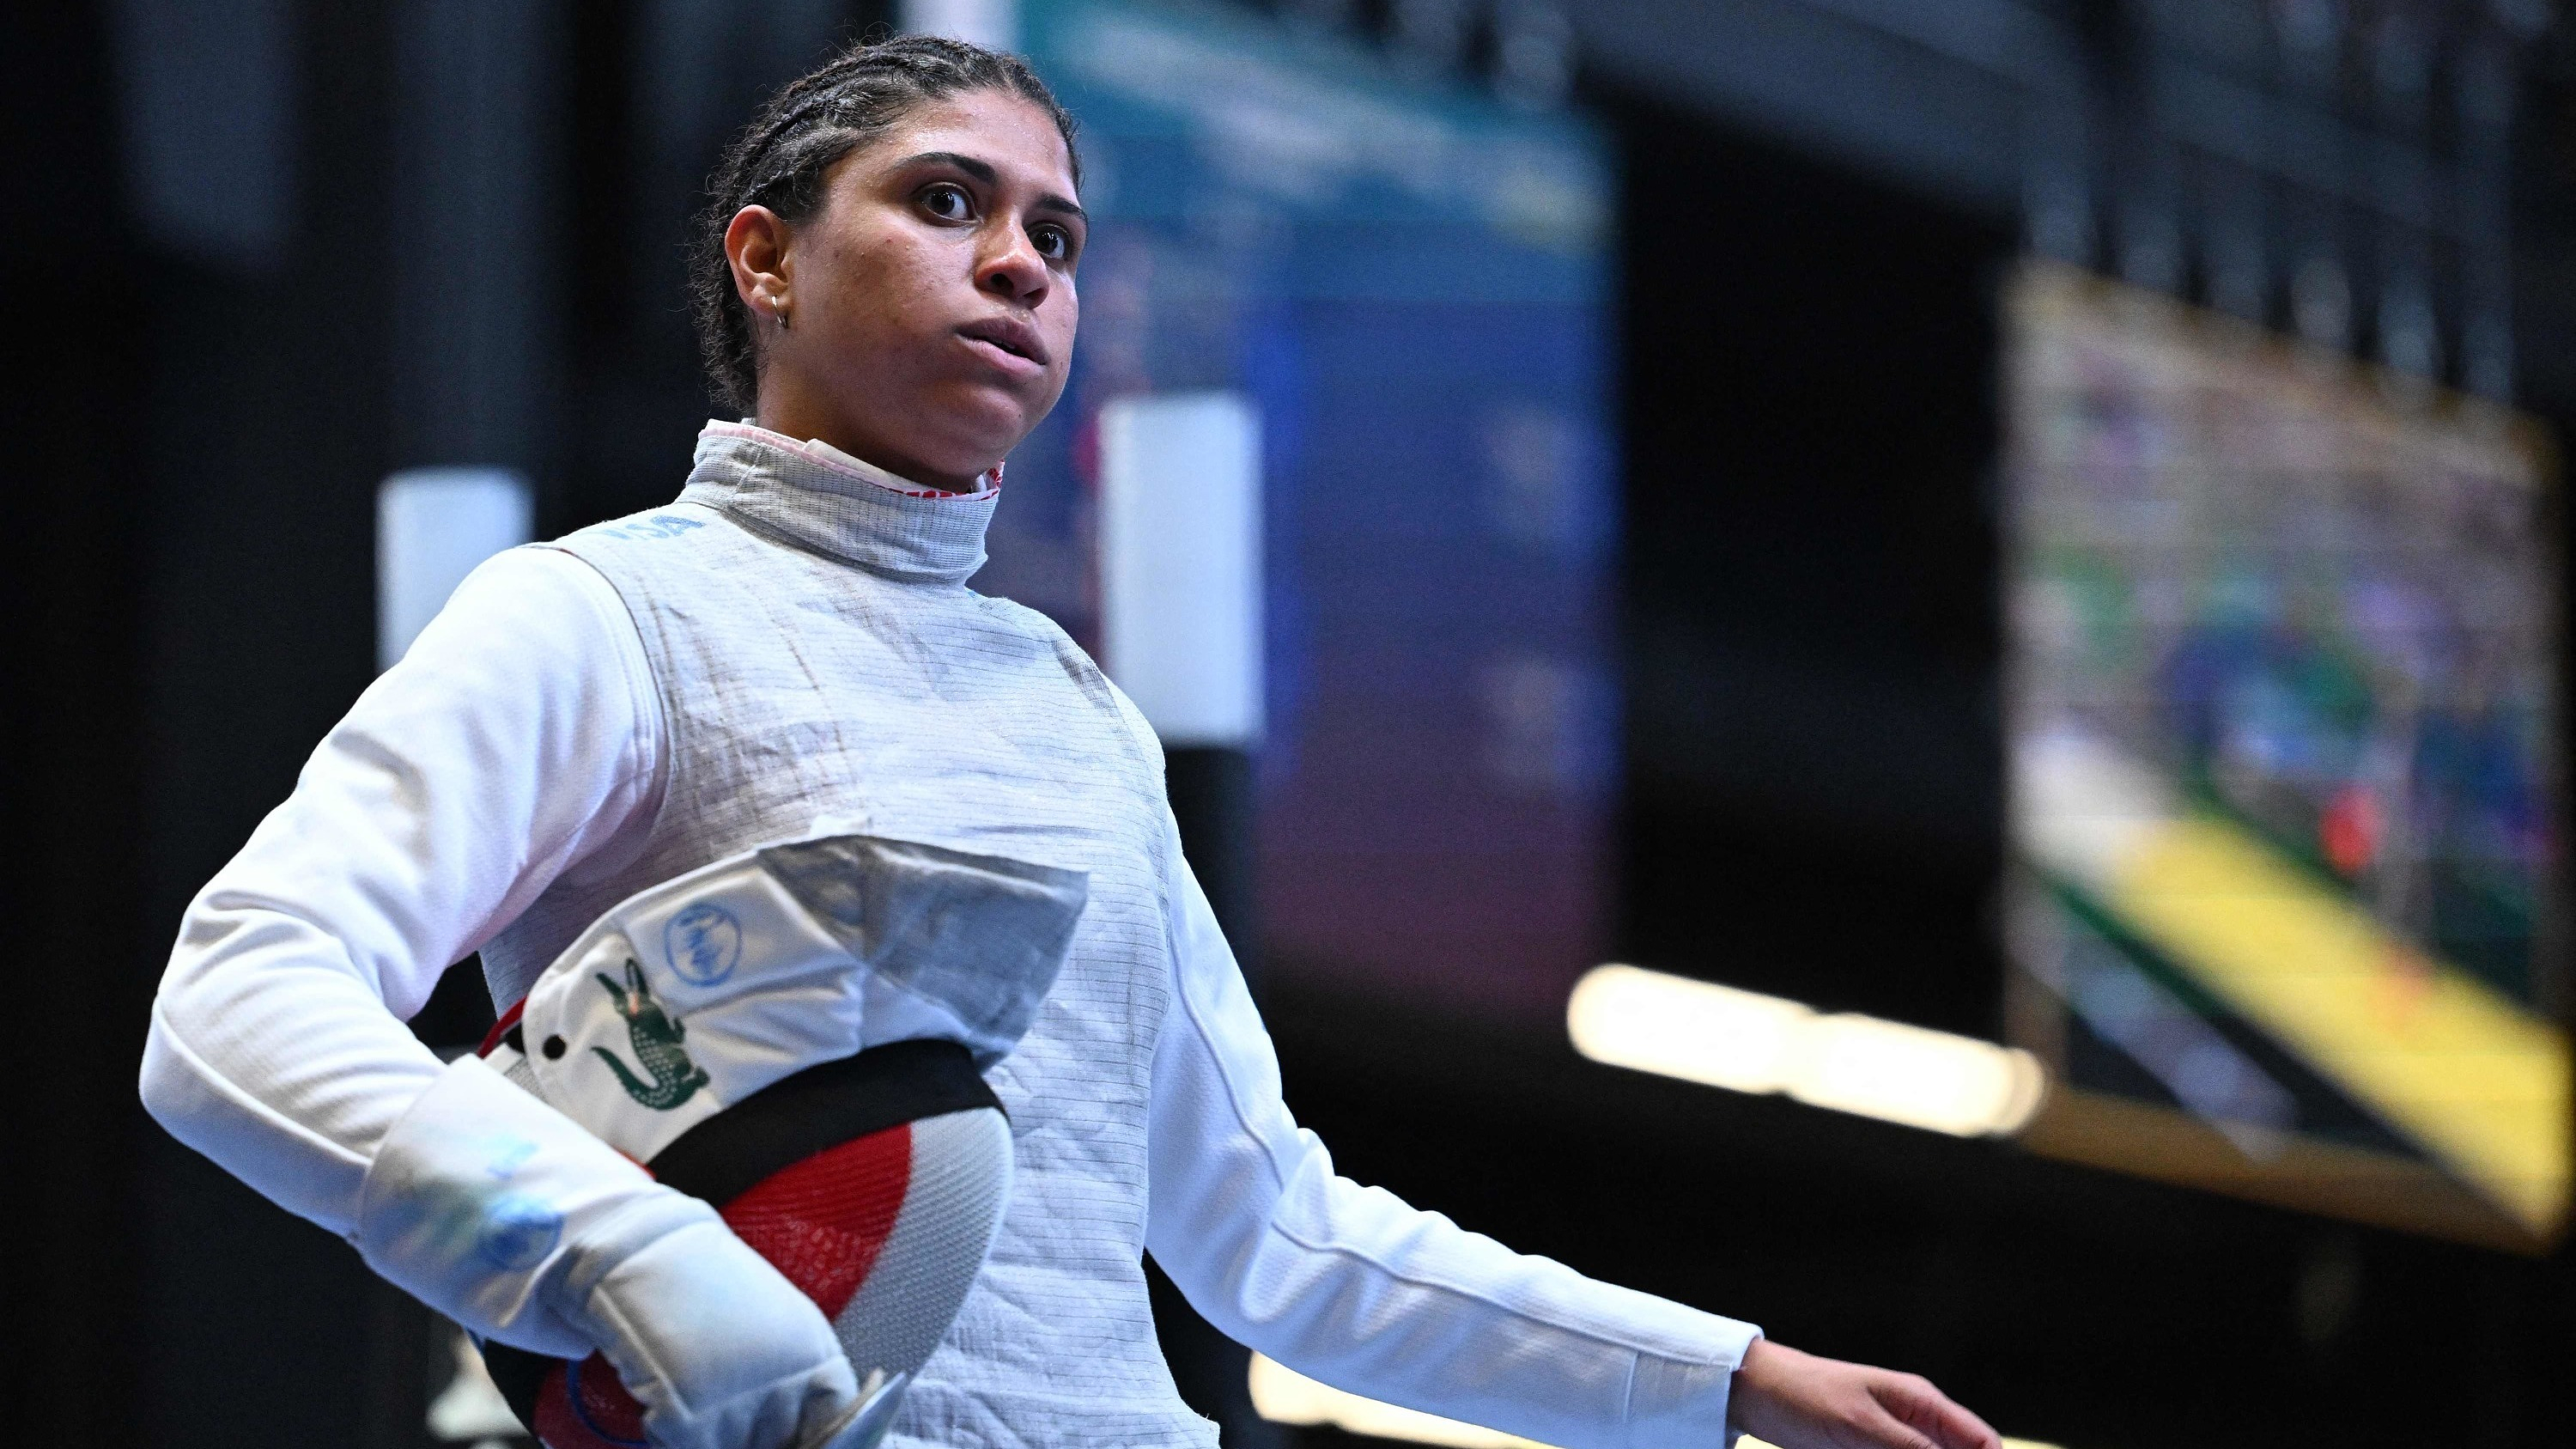 Fencing: Ysaora Thibus suspended for “an abnormal anti-doping analysis result”